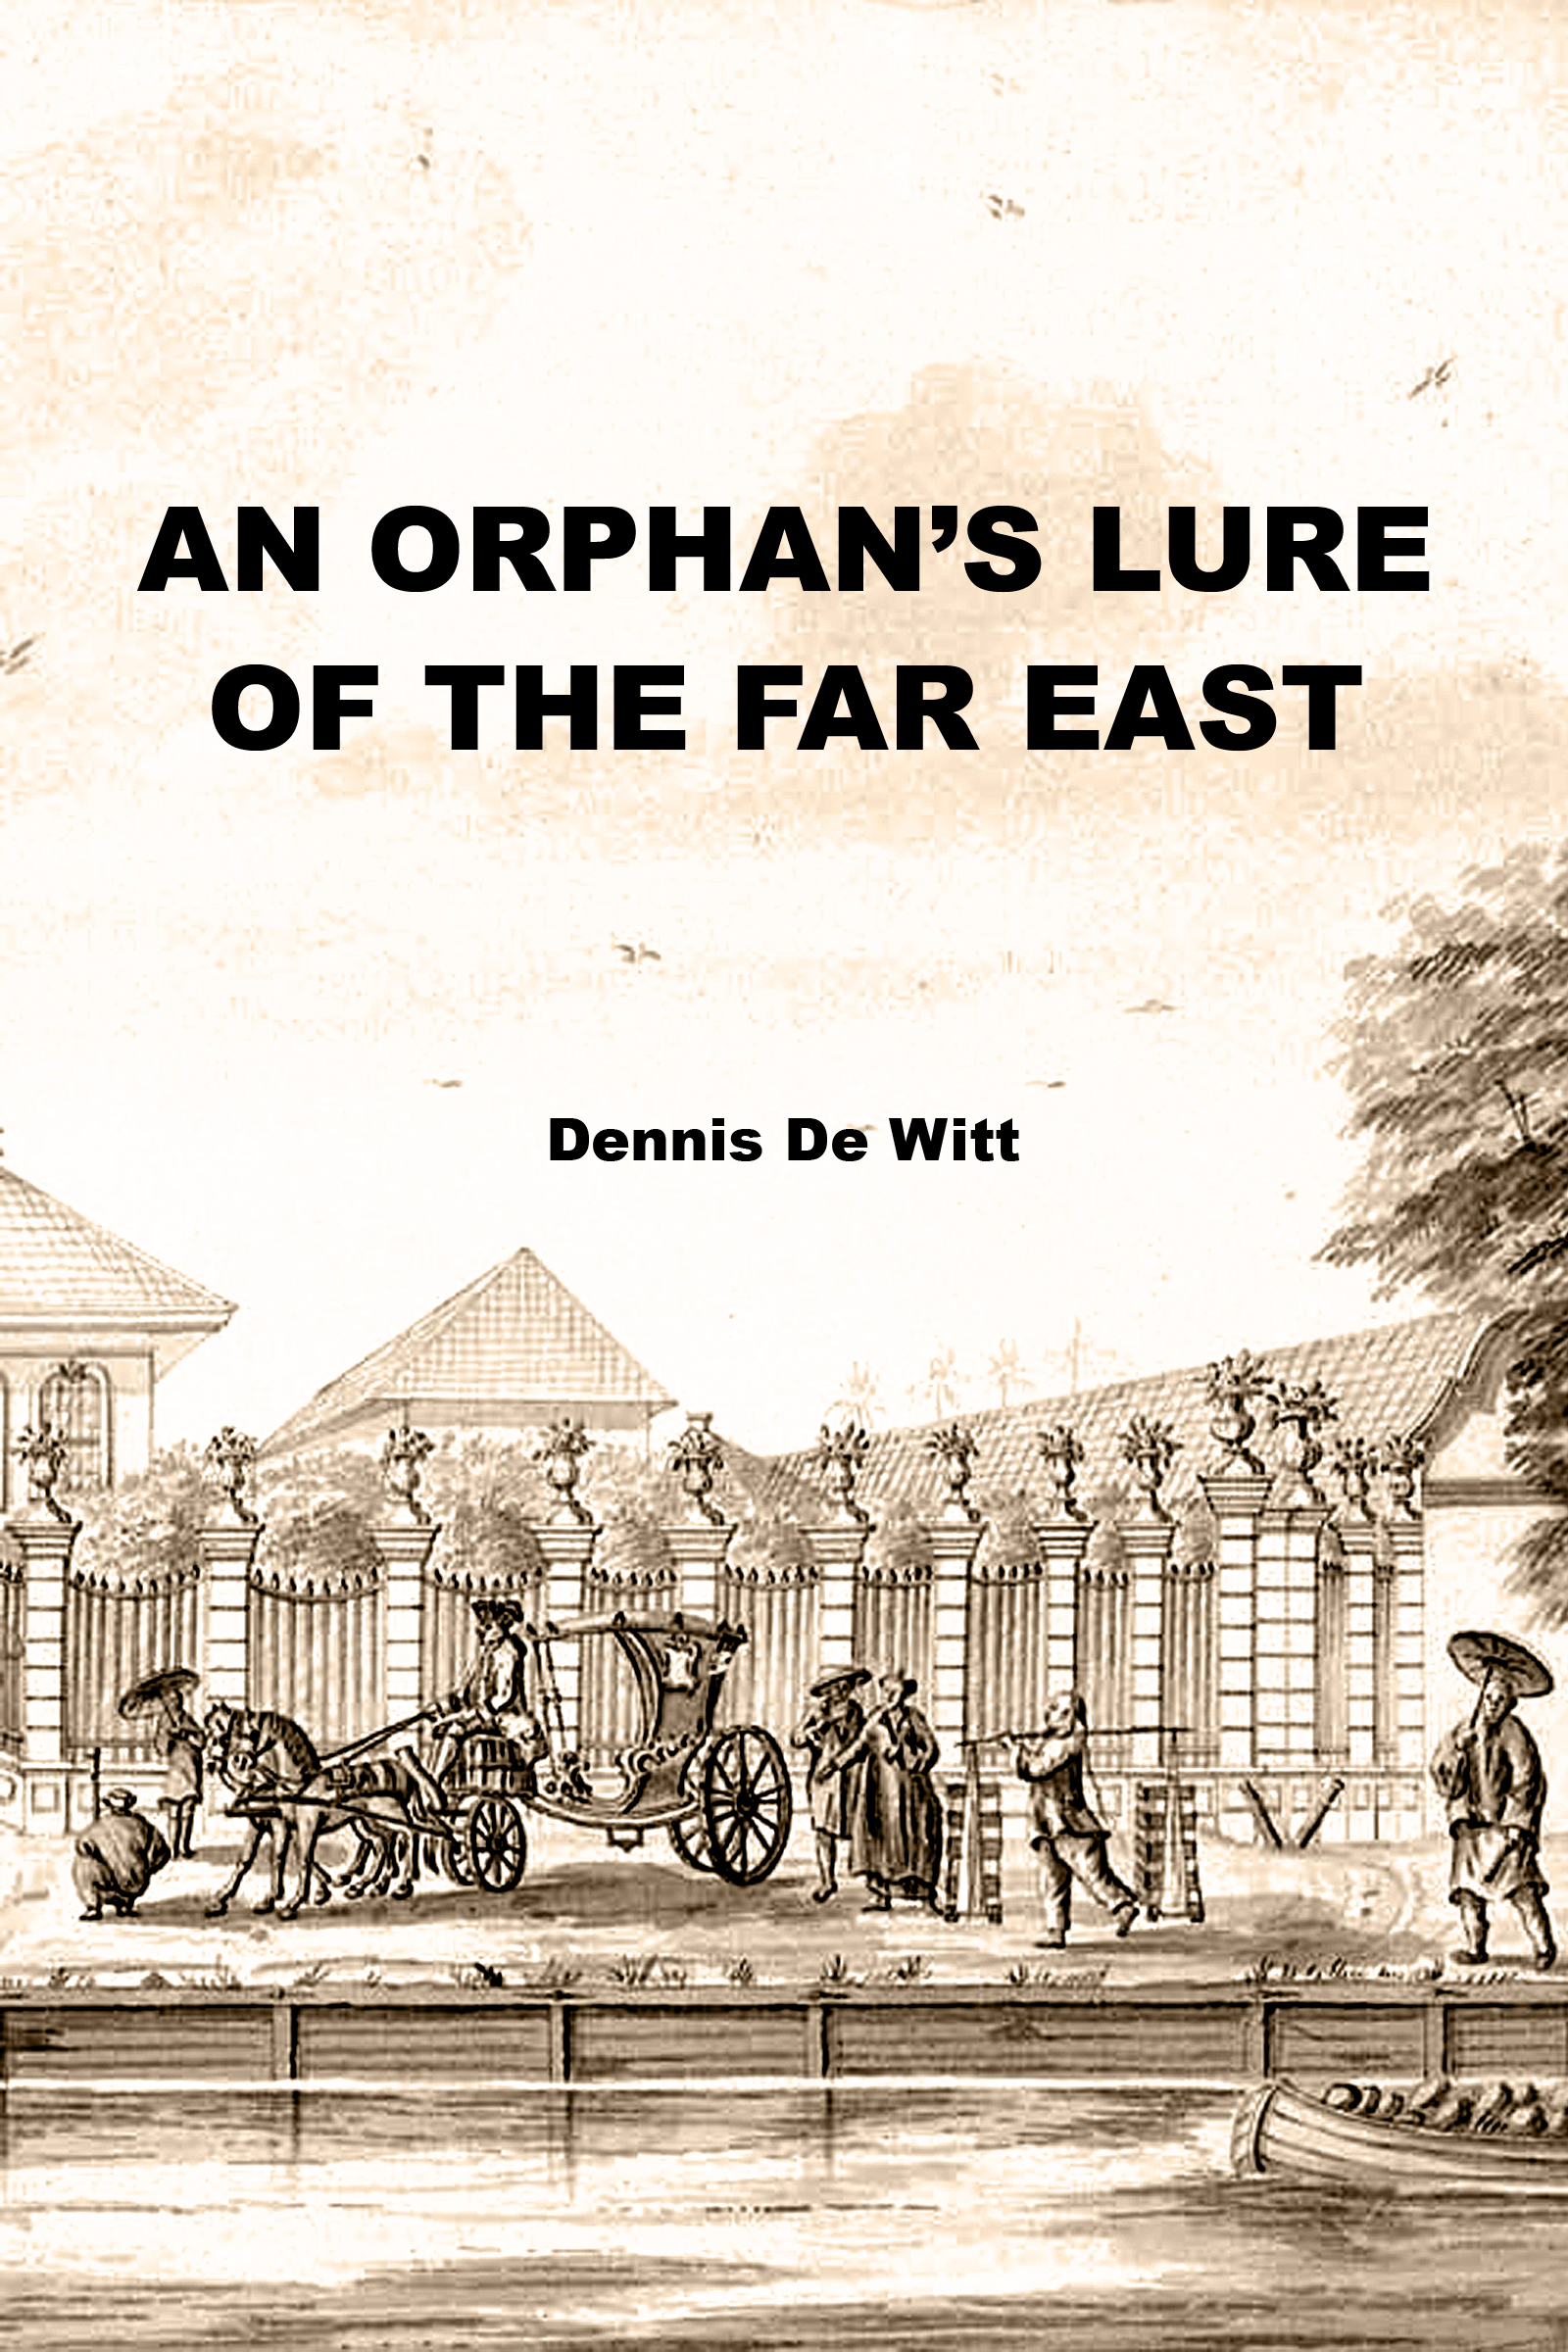 An Orphan's Lure to the Far East